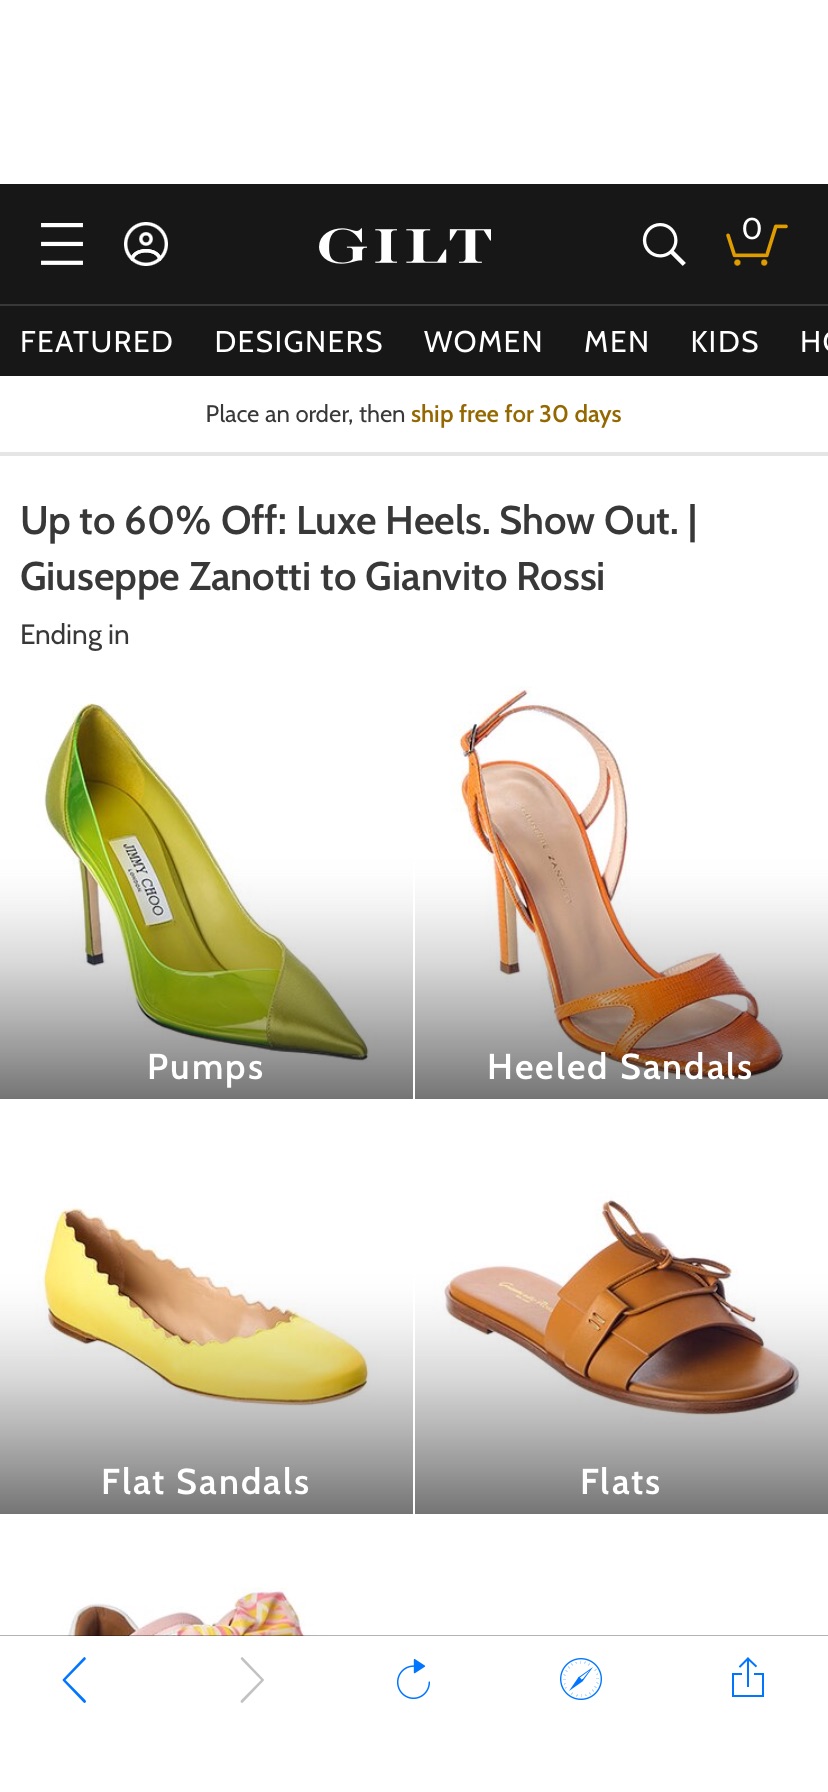 Up to 60% Off: Luxe Heels. Show Out. | Giuseppe Zanotti to Gianvito Rossi / Gilt低至四折